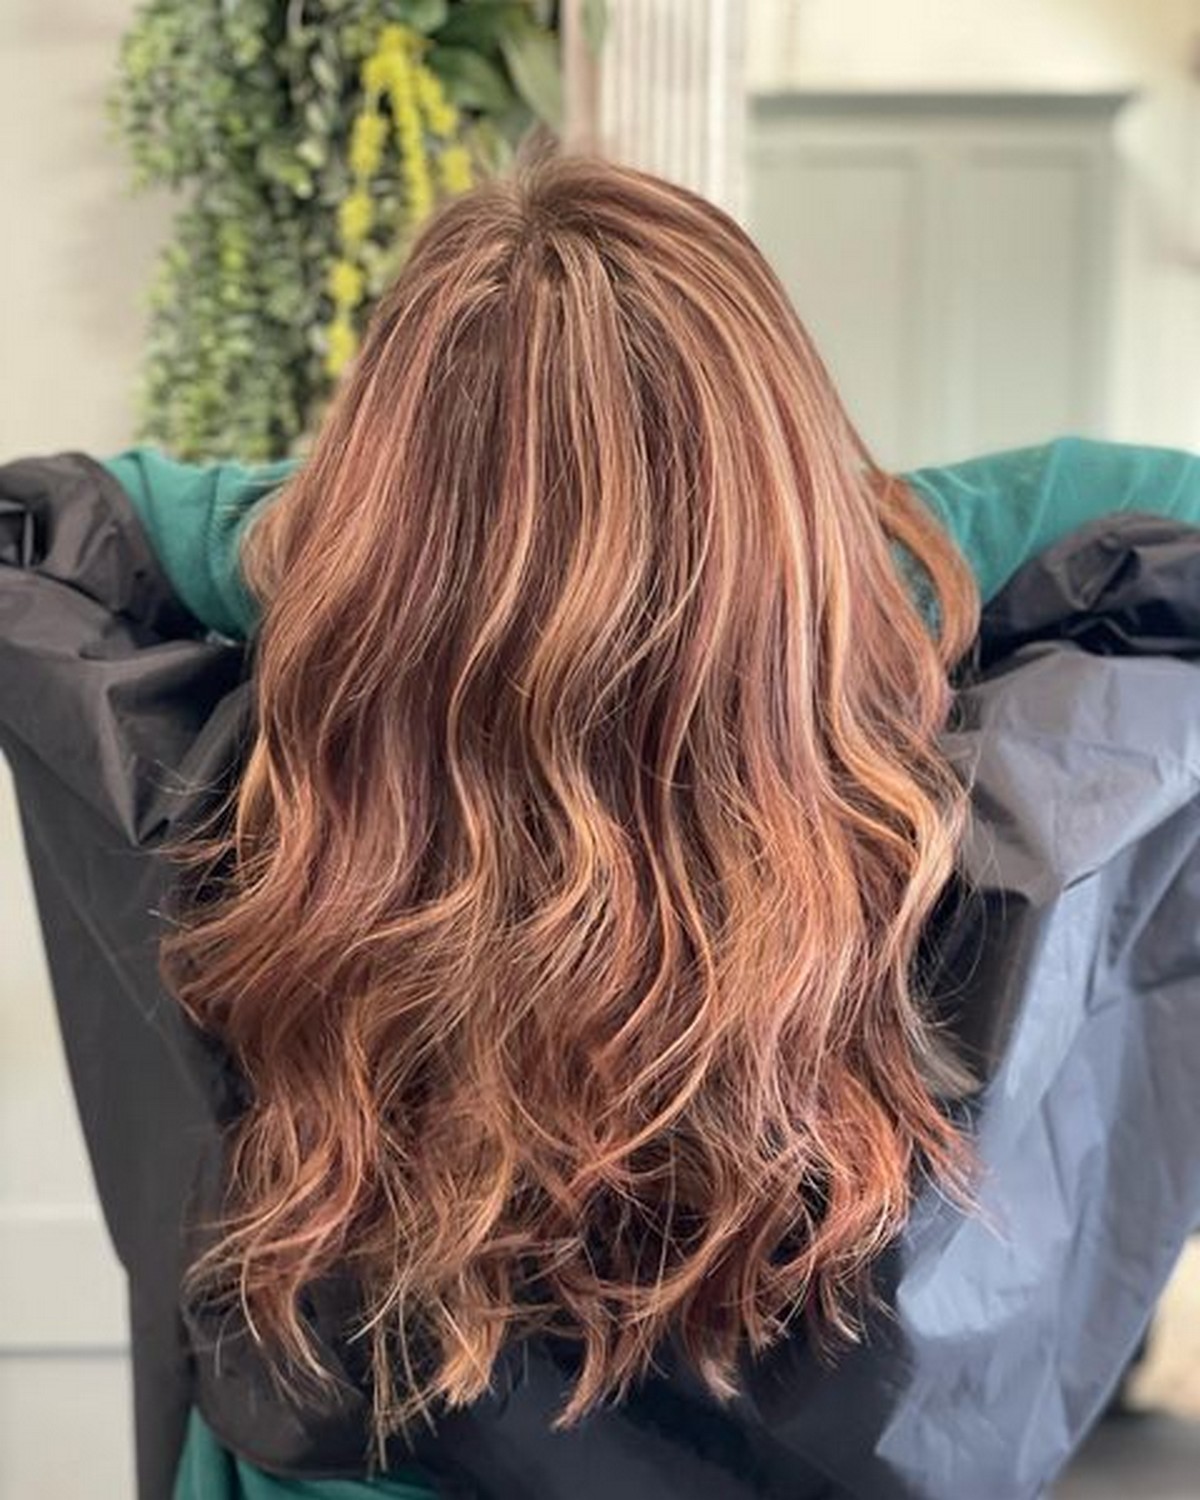 Rich Red And Blonde Highlights On This Beauty